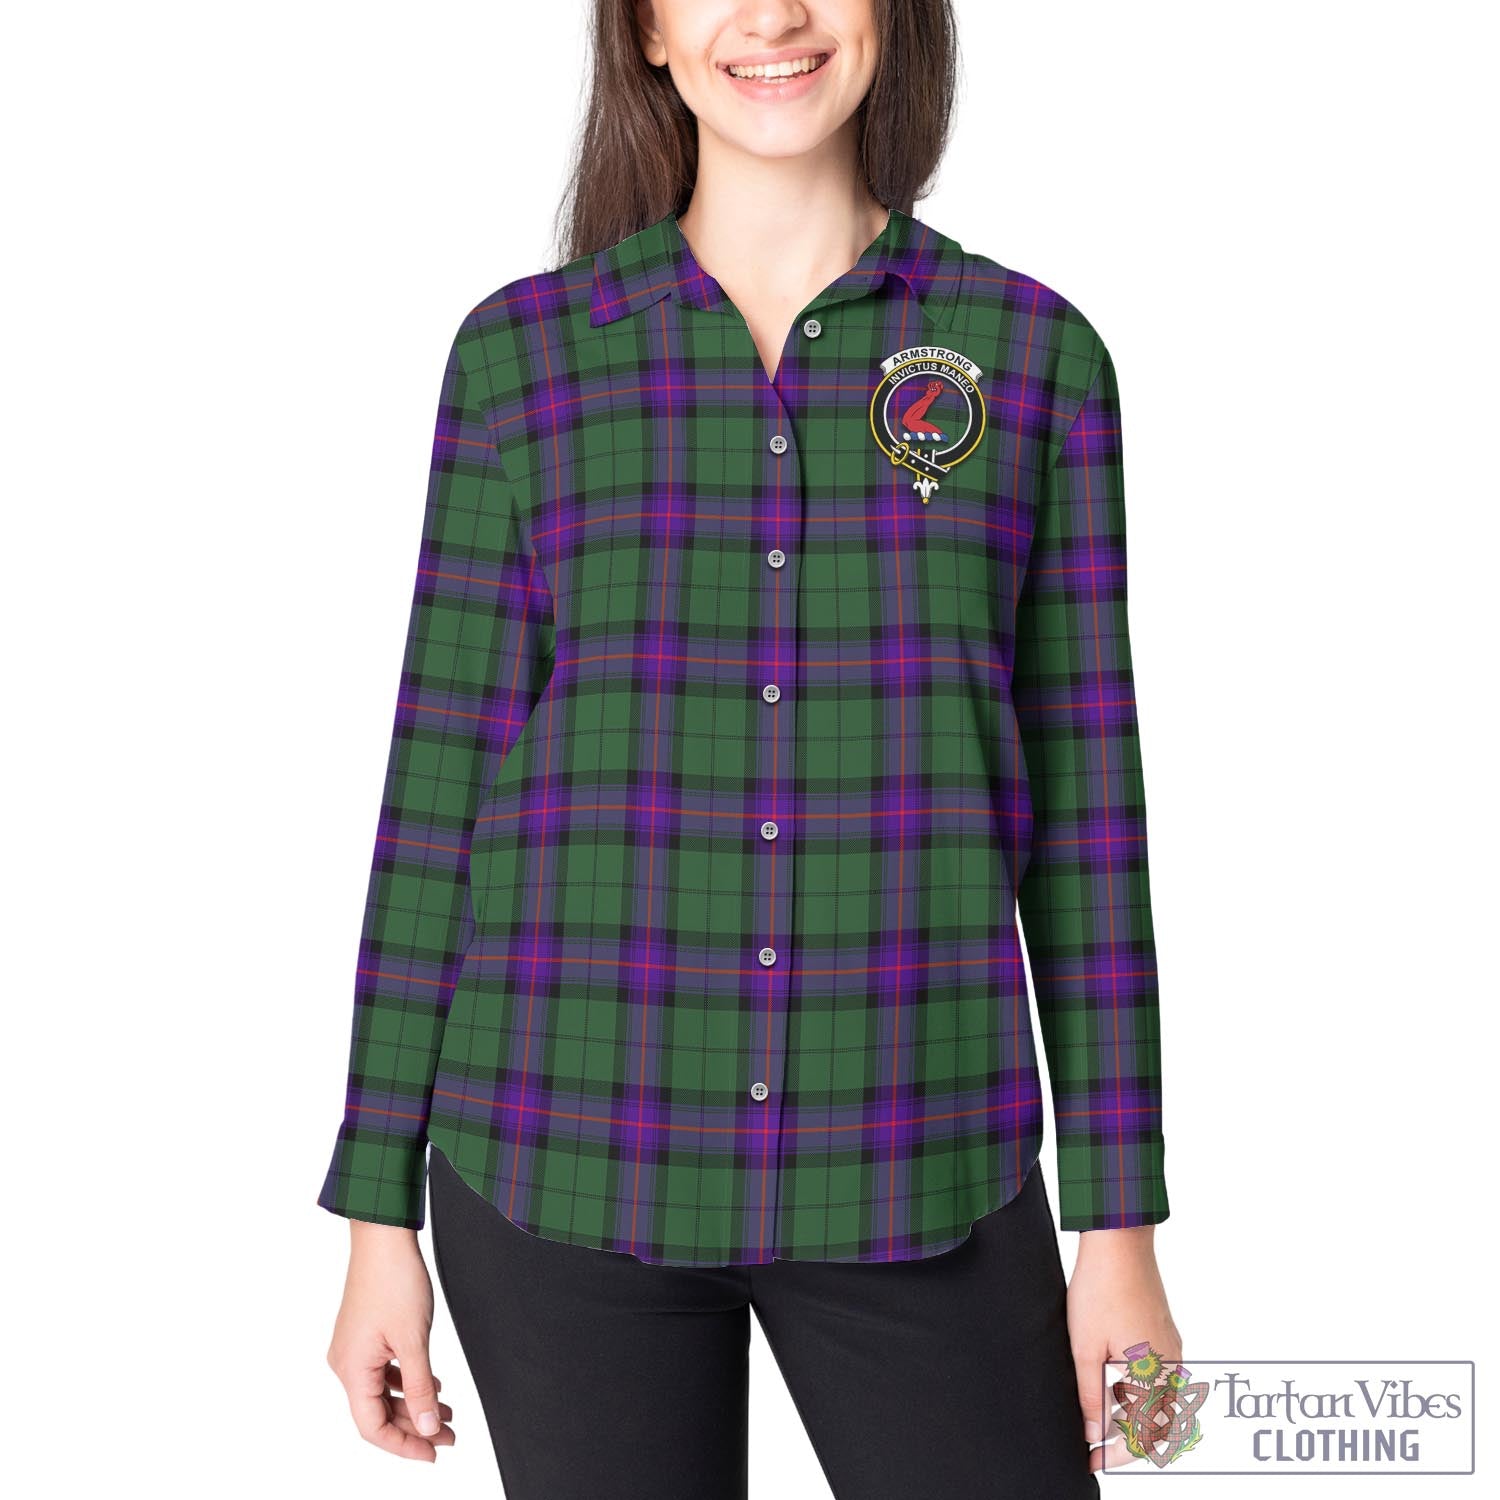 Tartan Vibes Clothing Armstrong Modern Tartan Womens Casual Shirt with Family Crest